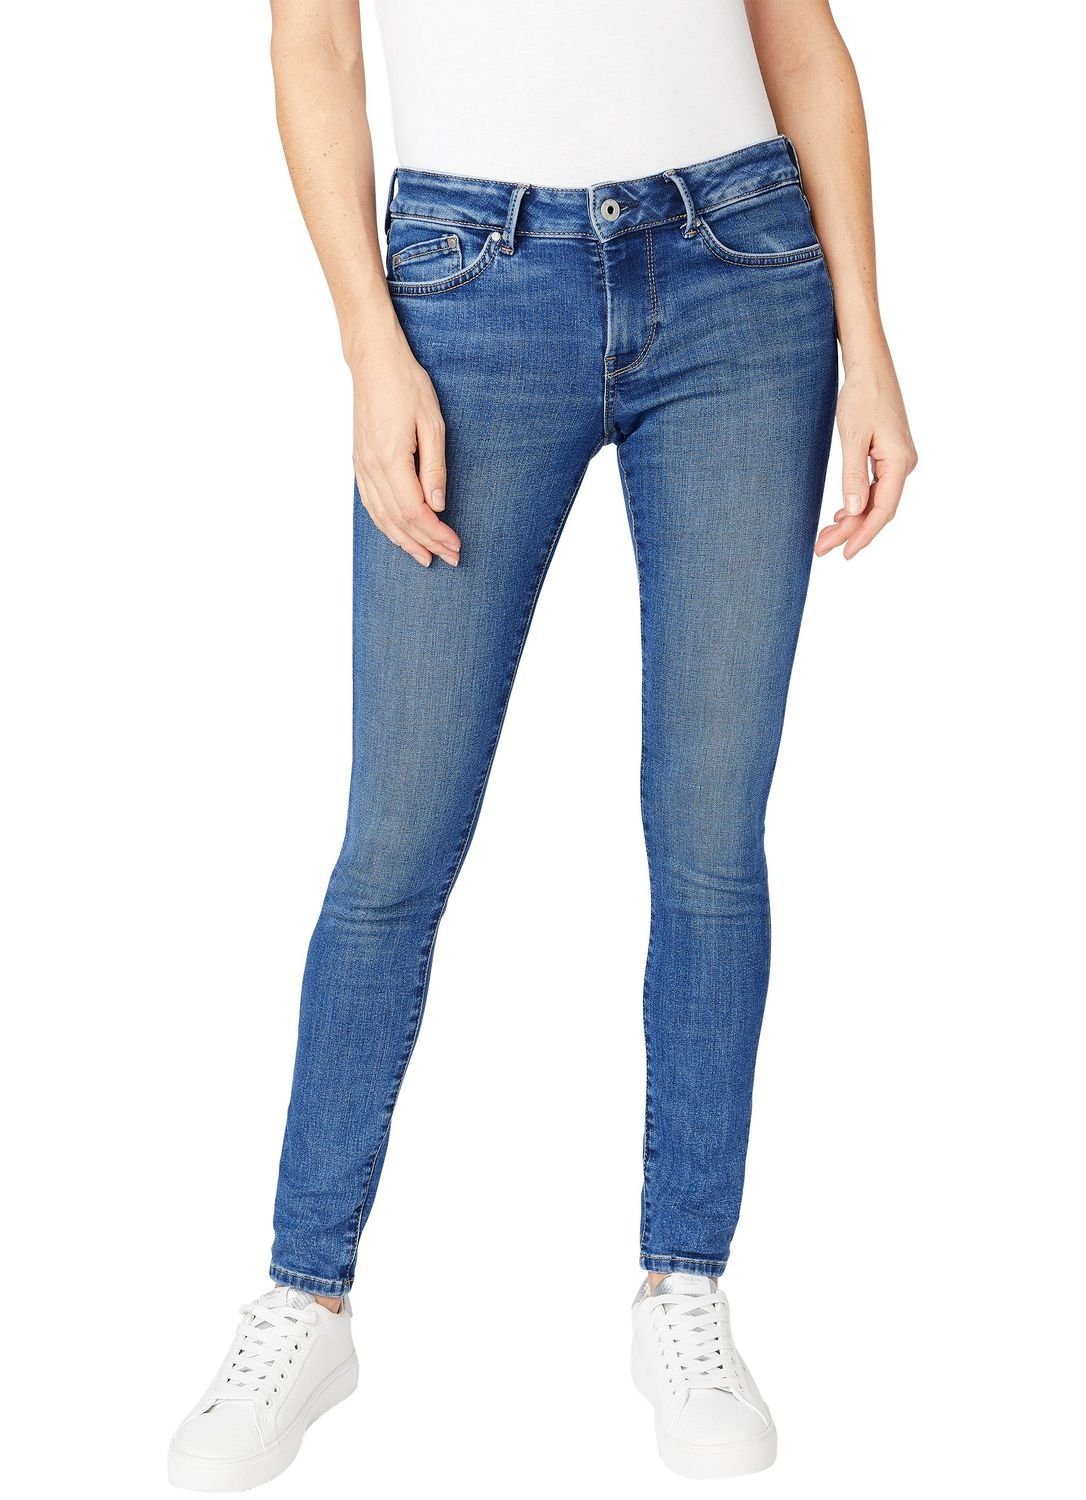 Pepe Jeans Jeans online kaufen | OTTO